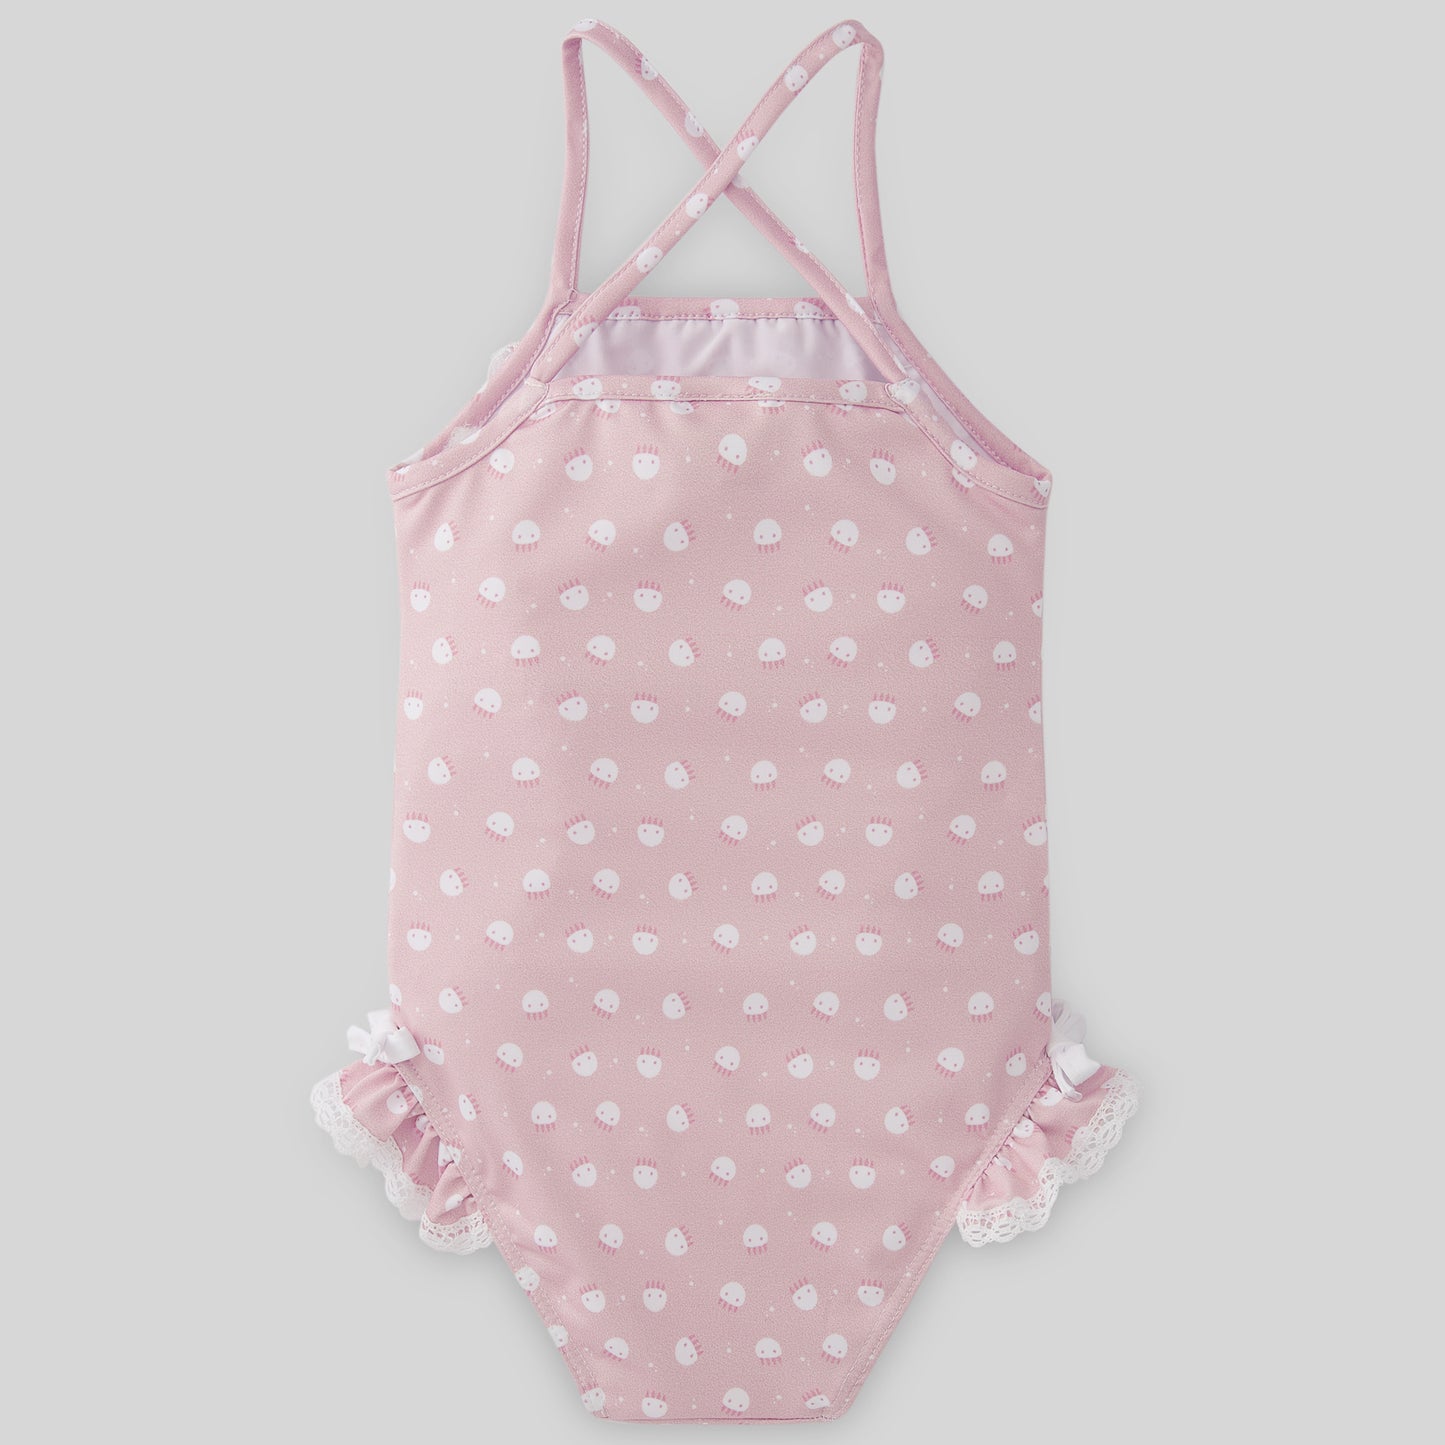 PAZ RODRIGUEZ Pink-white jellyfish patterned one-piece swimsuit